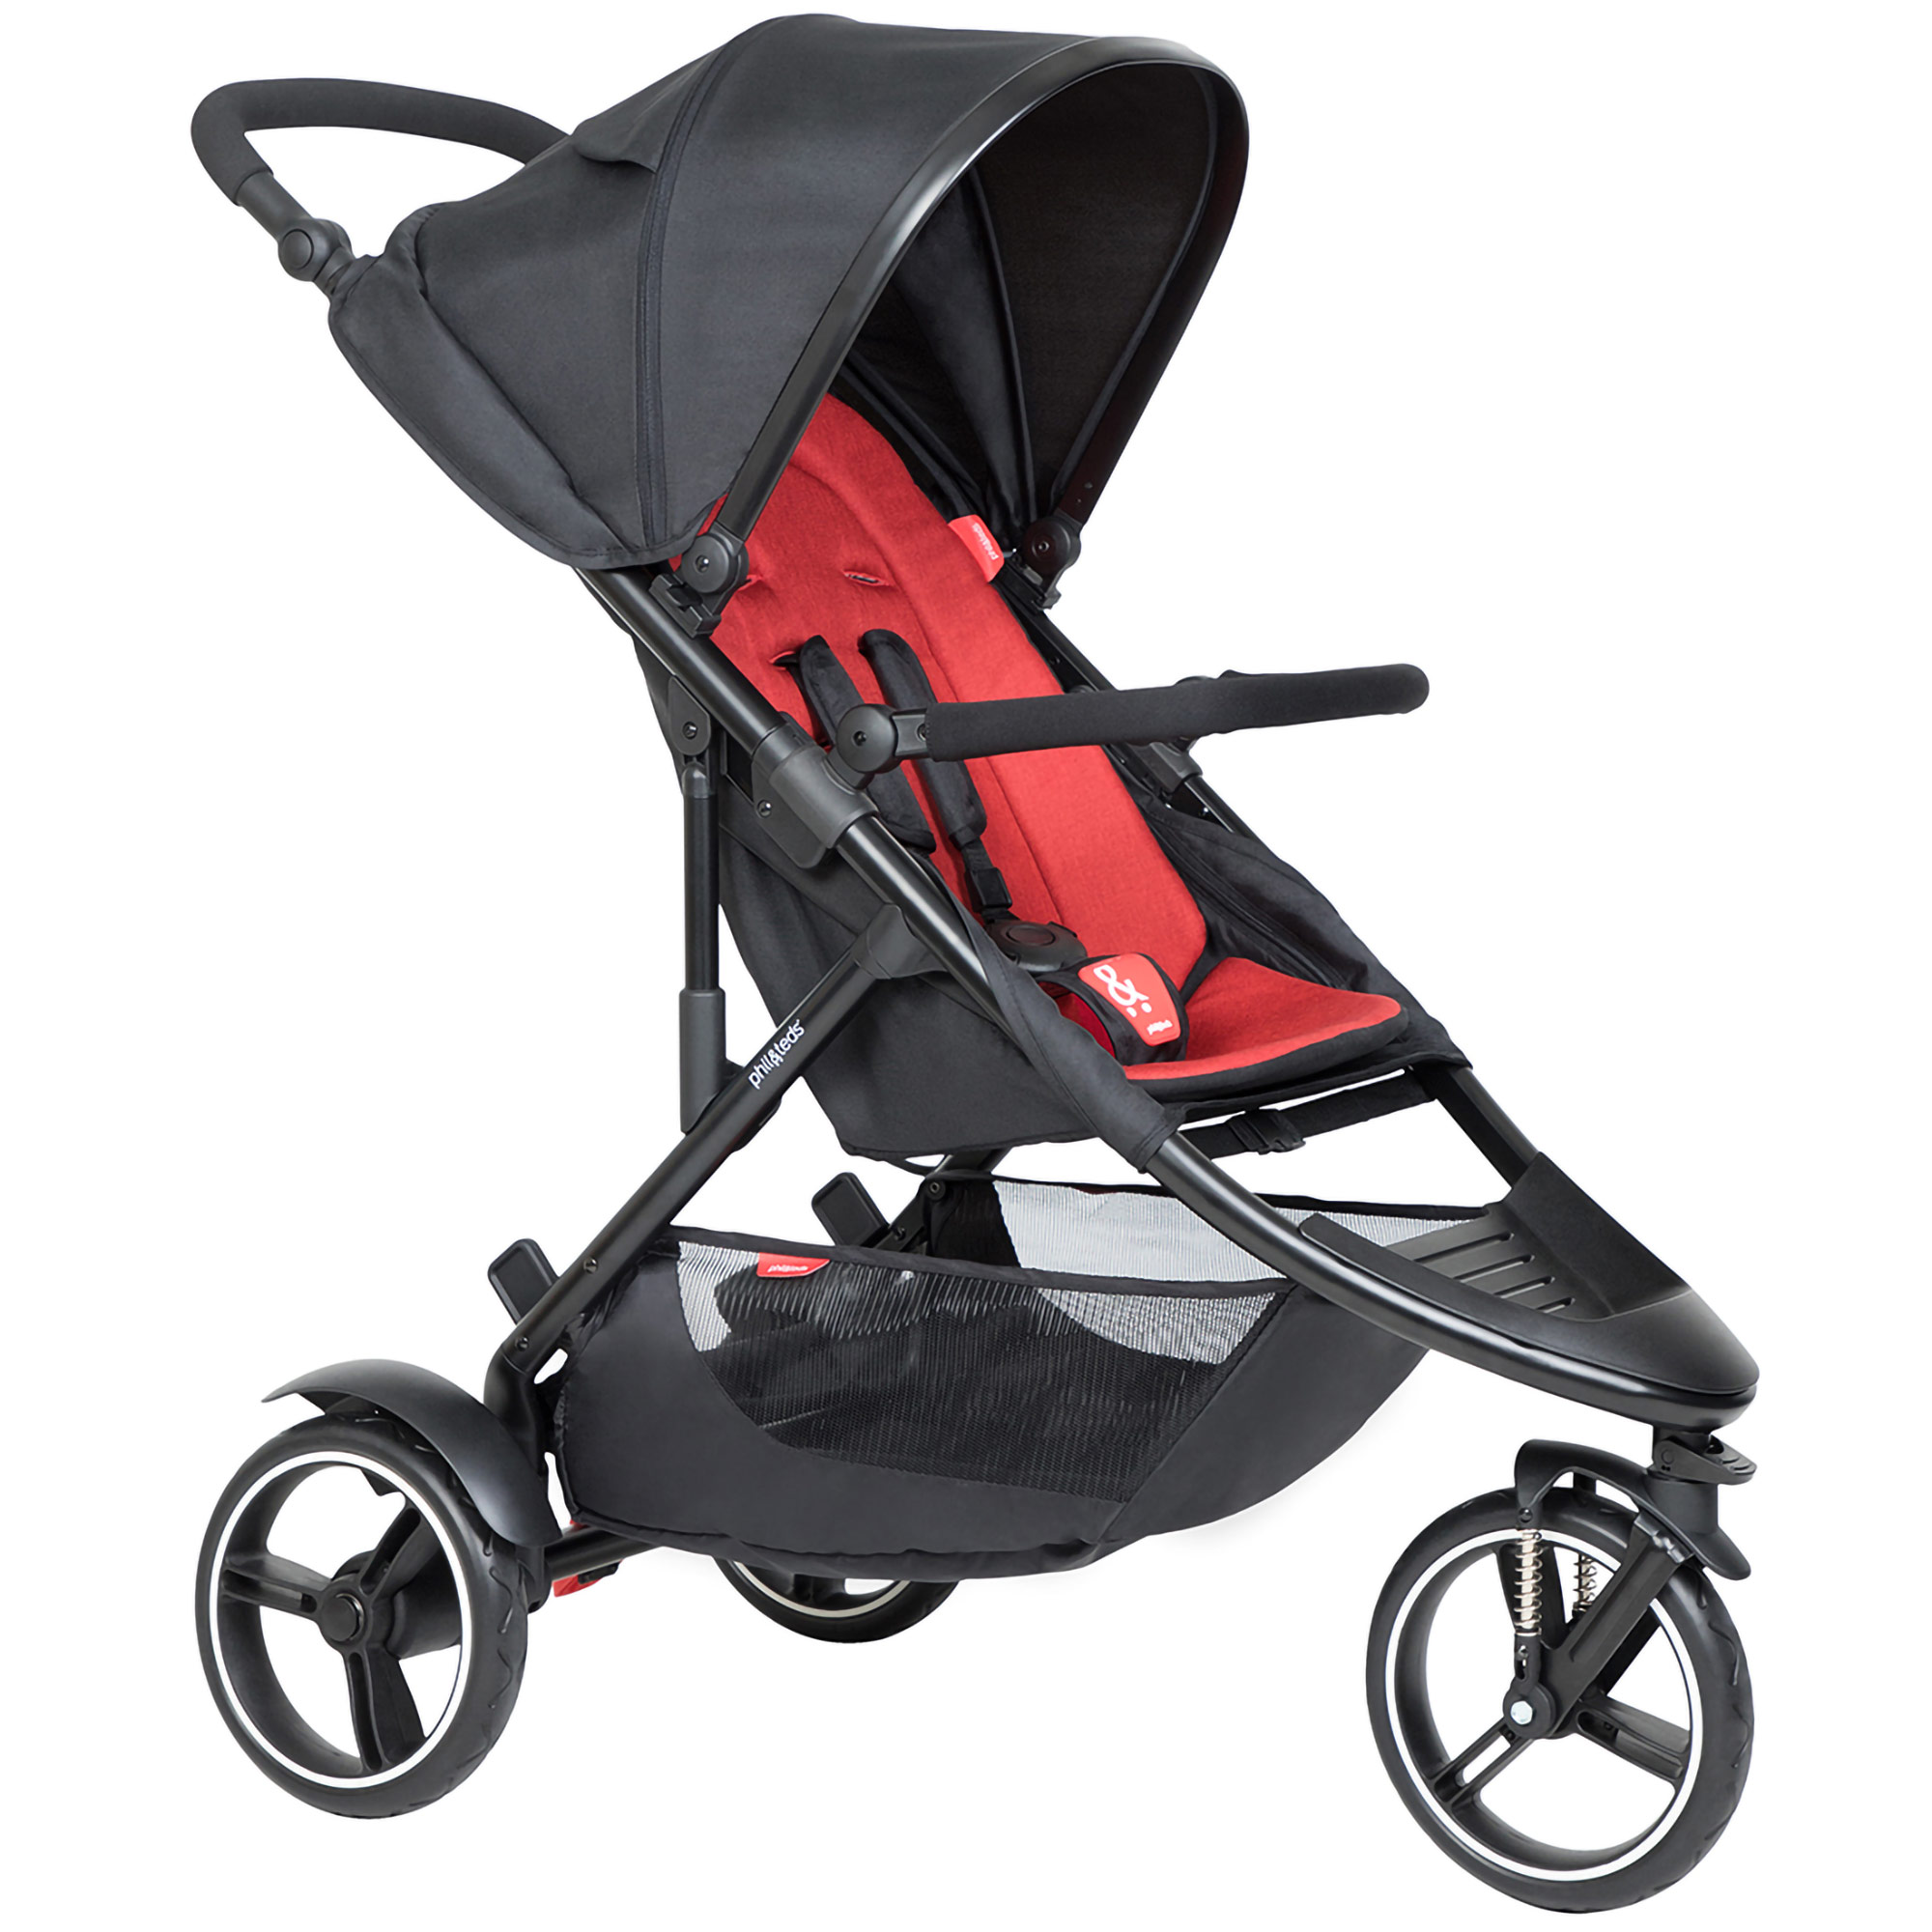 pushchair for child over 20kg